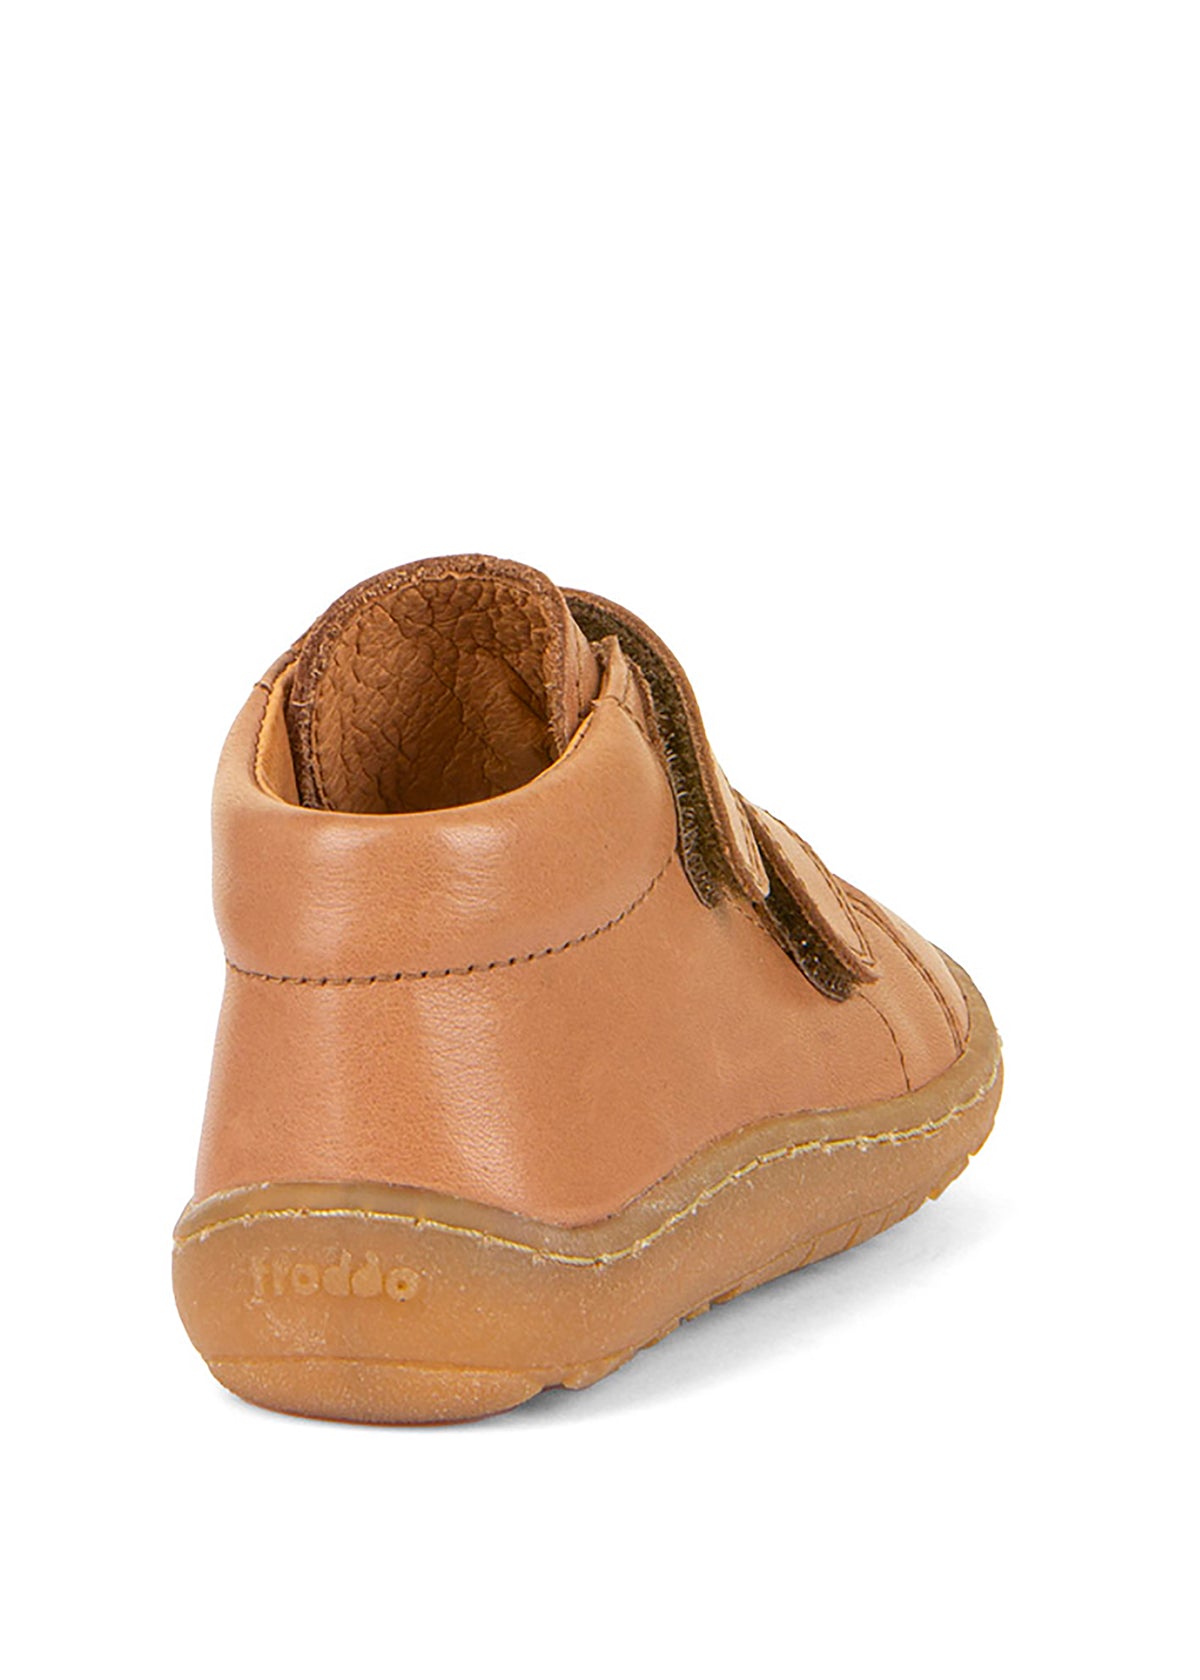 Children's barefoot shoes - brown leather, Barefoot First Step